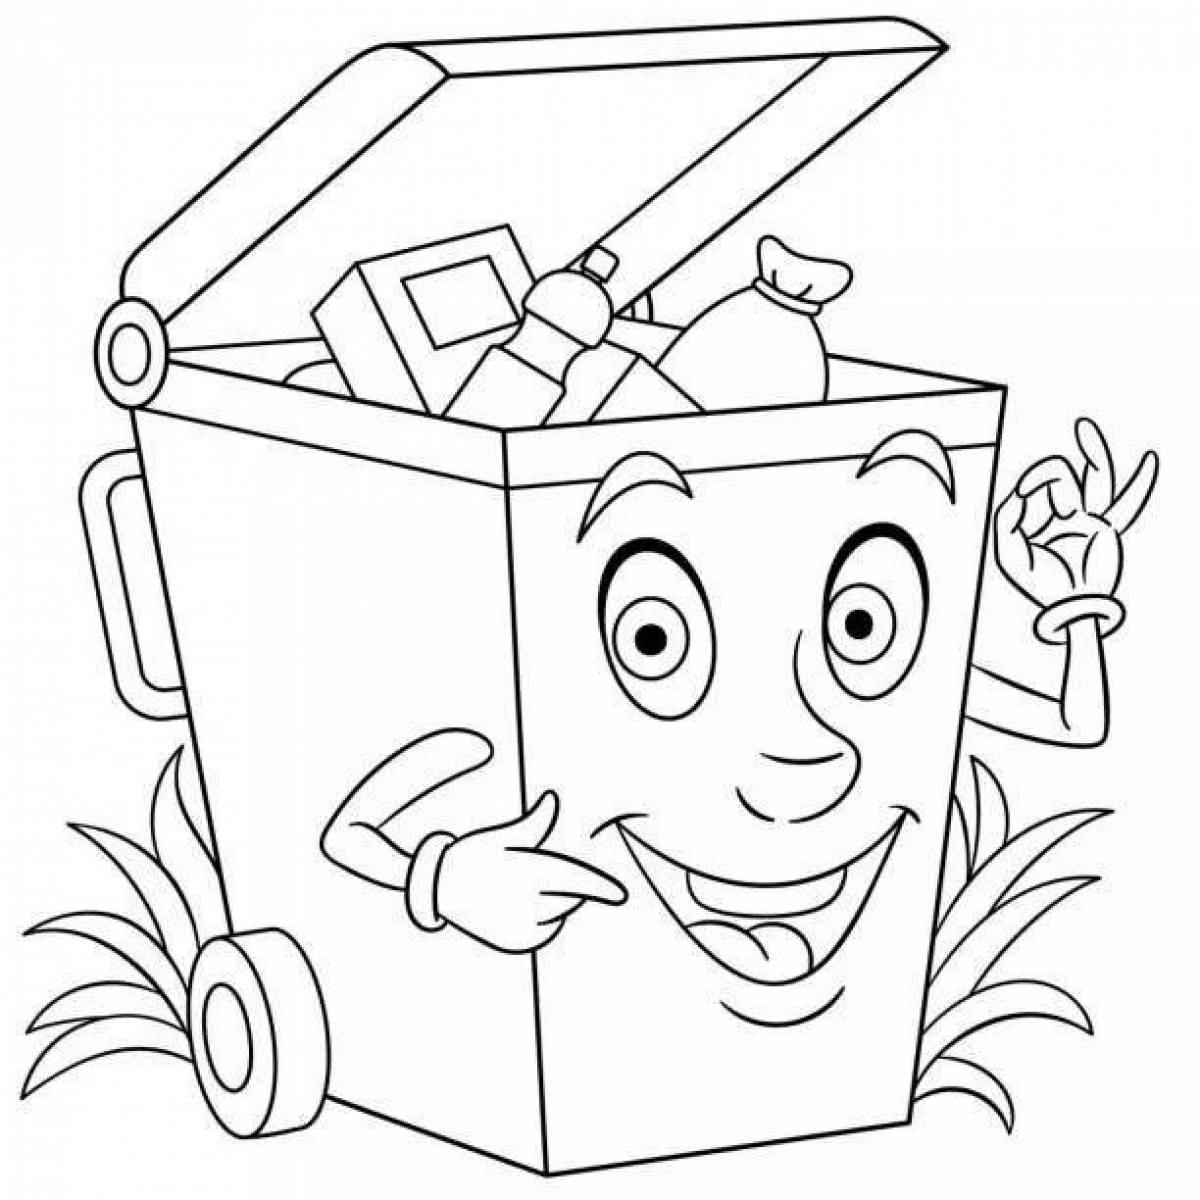 Detailed trash coloring page